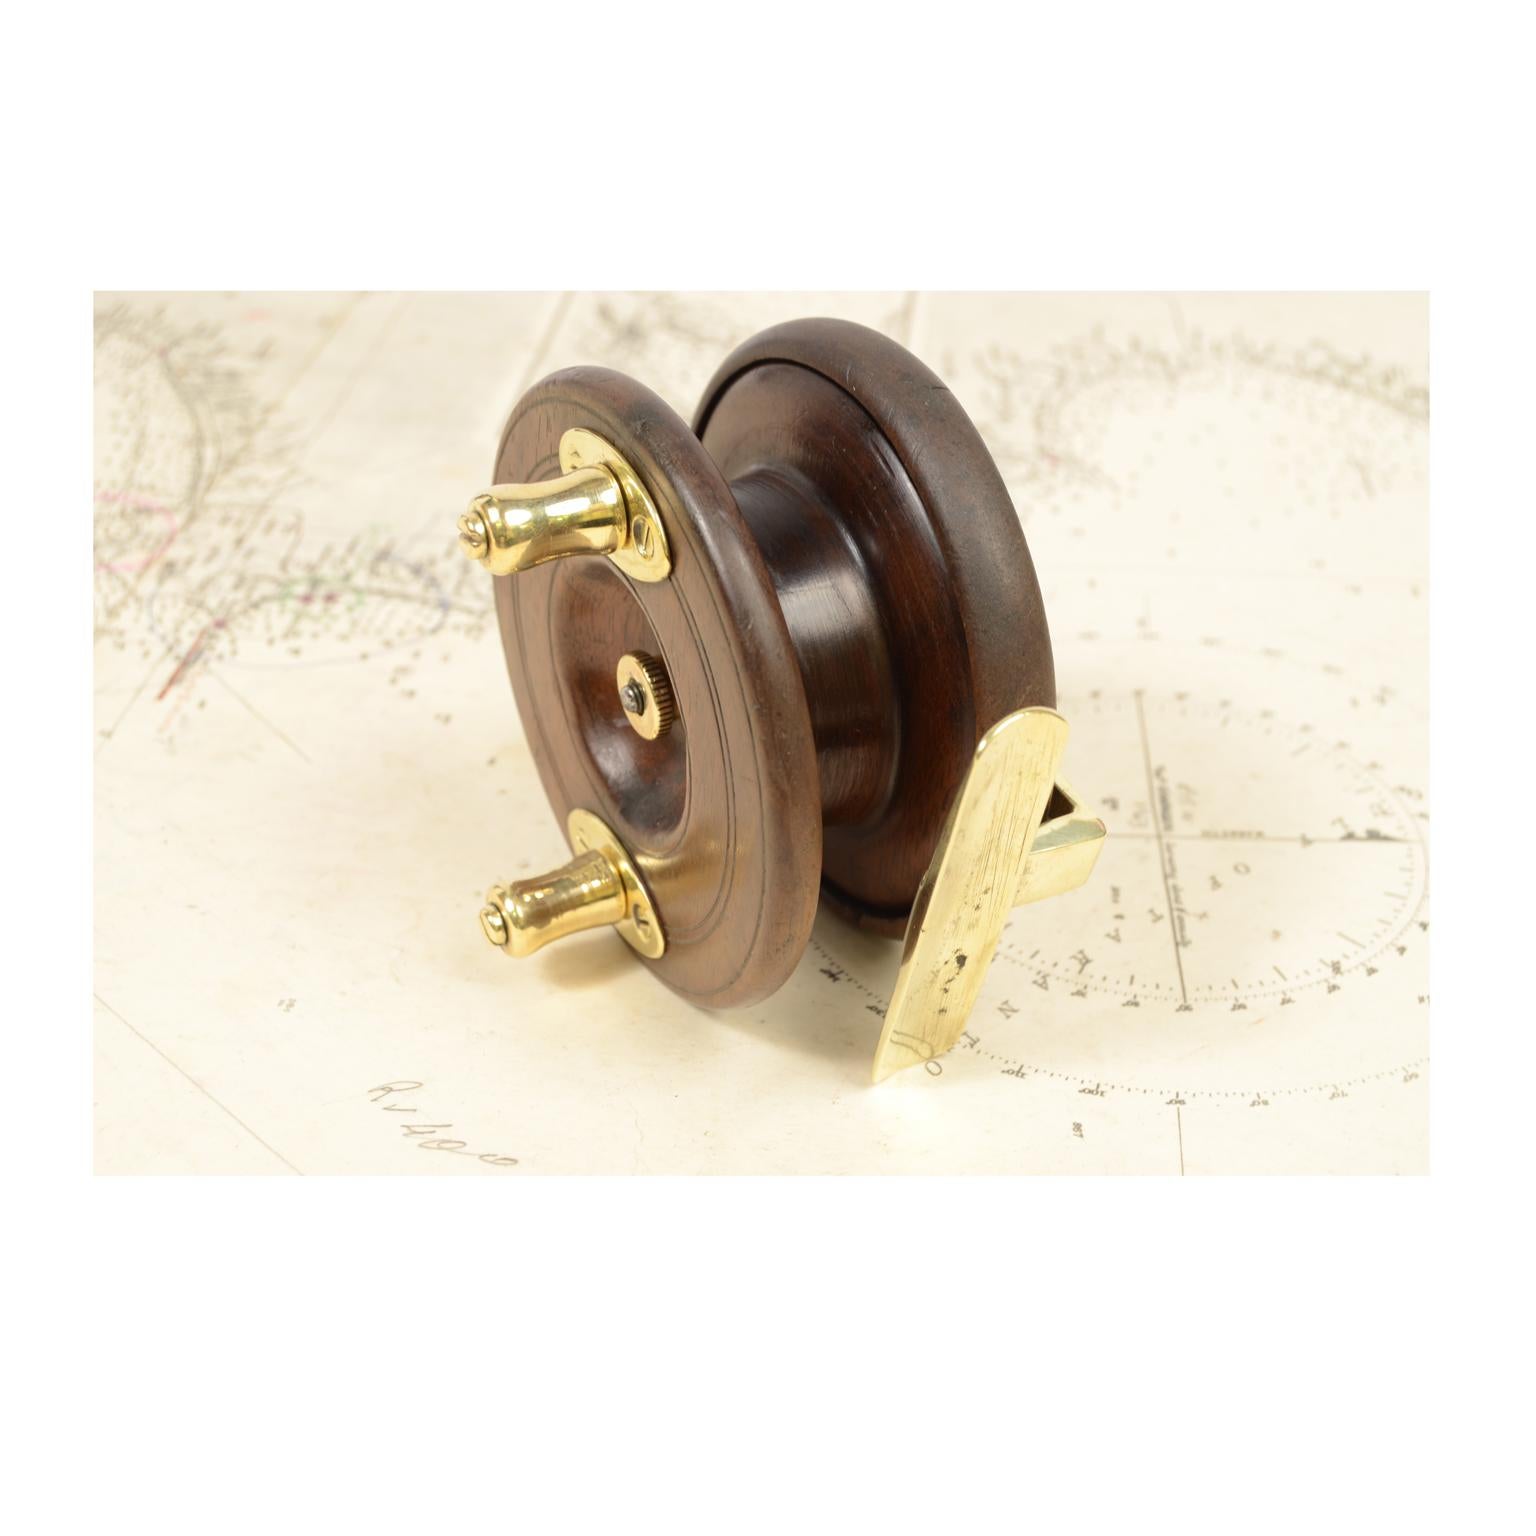 Antique Fishing Reel Made of Turned Oak and Brass, UK, Early 1900s 1